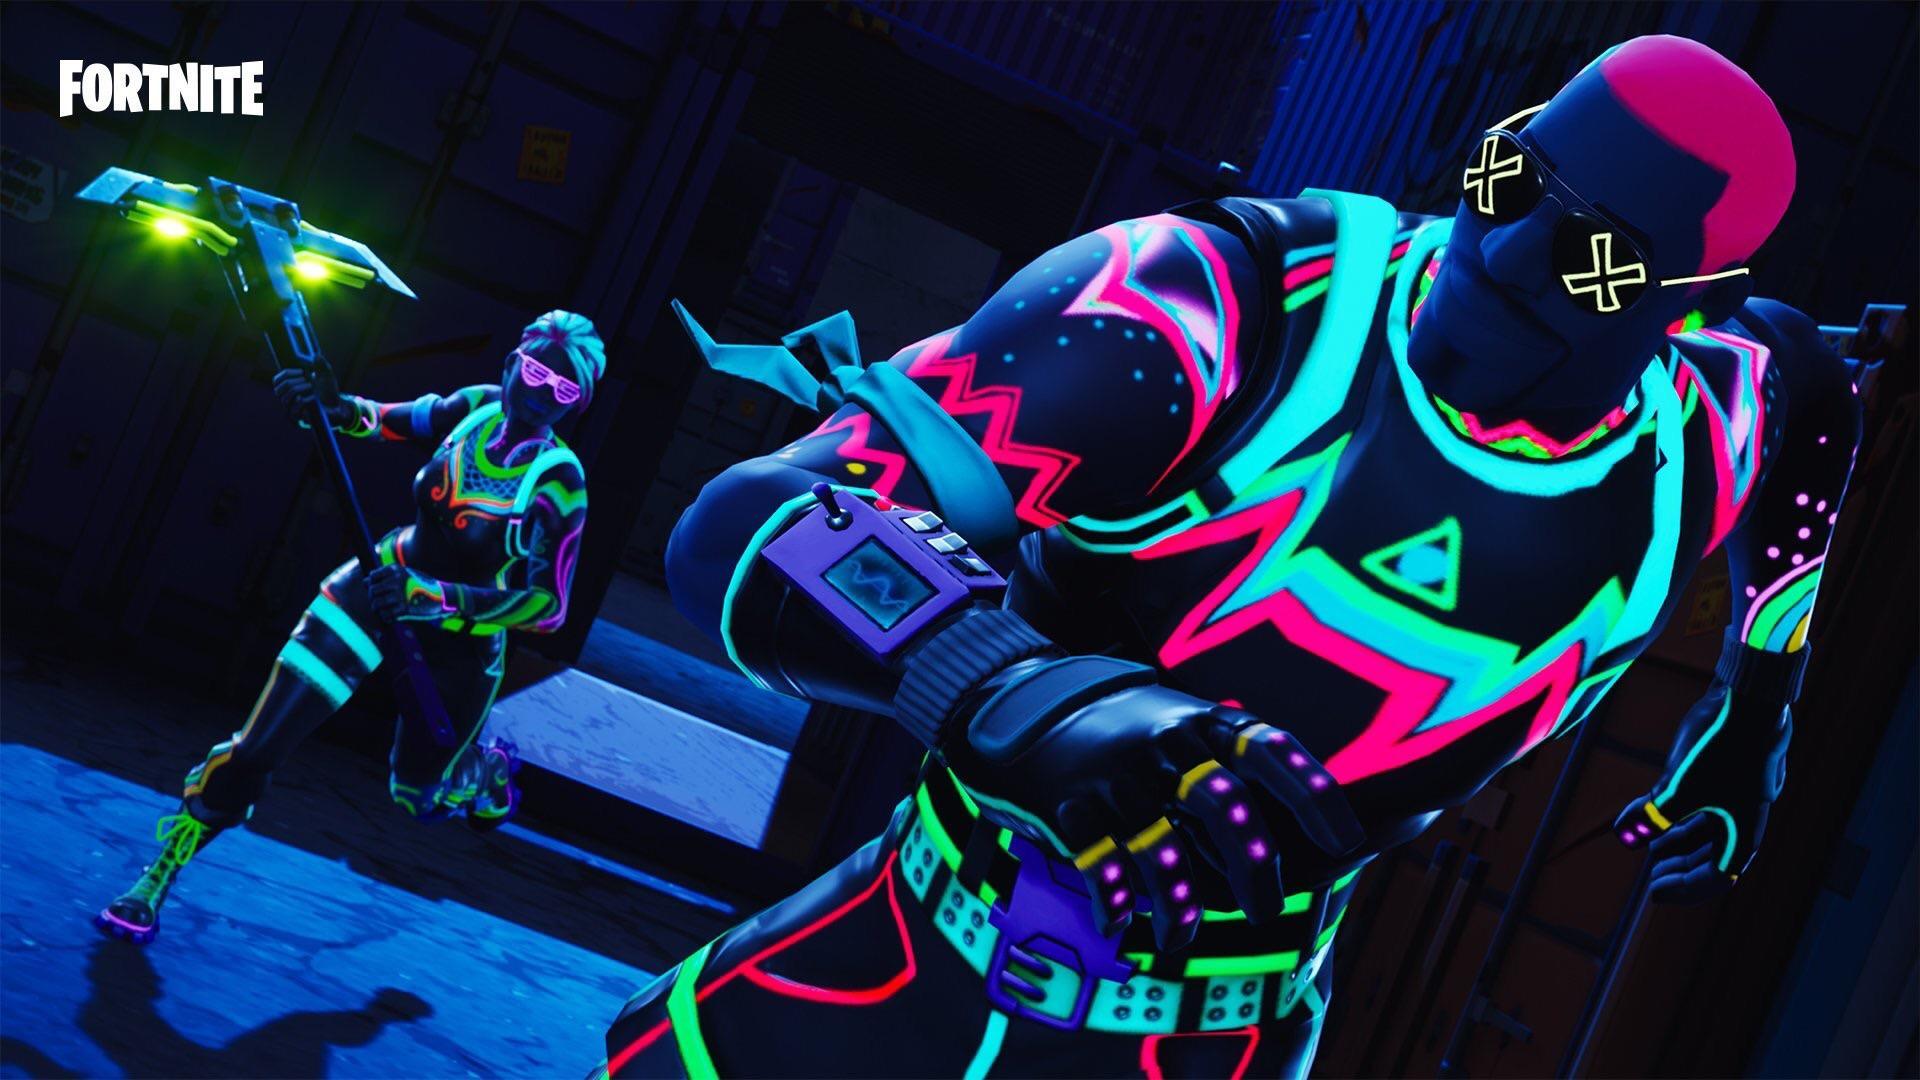 Kind of upset that we didn't get skins like this during the Neon